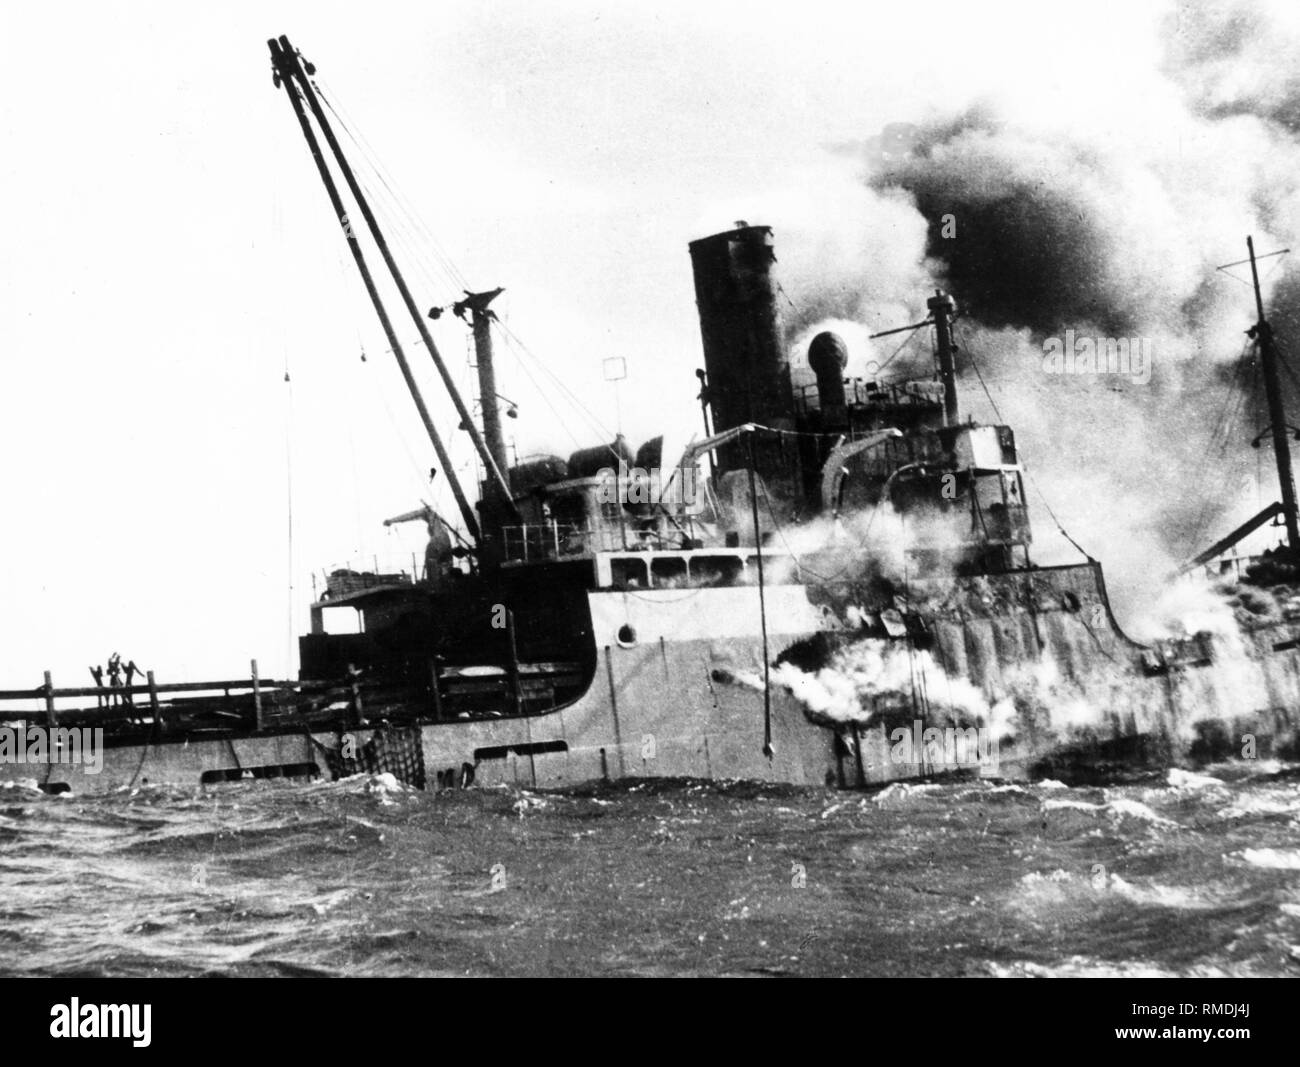 The sinking ship "Houston", which had been bombed by Castro's aircrafts, and caught fire. Most of the Cuban exiles, who were on board the transport ship, drowned in the sea. Stock Photo